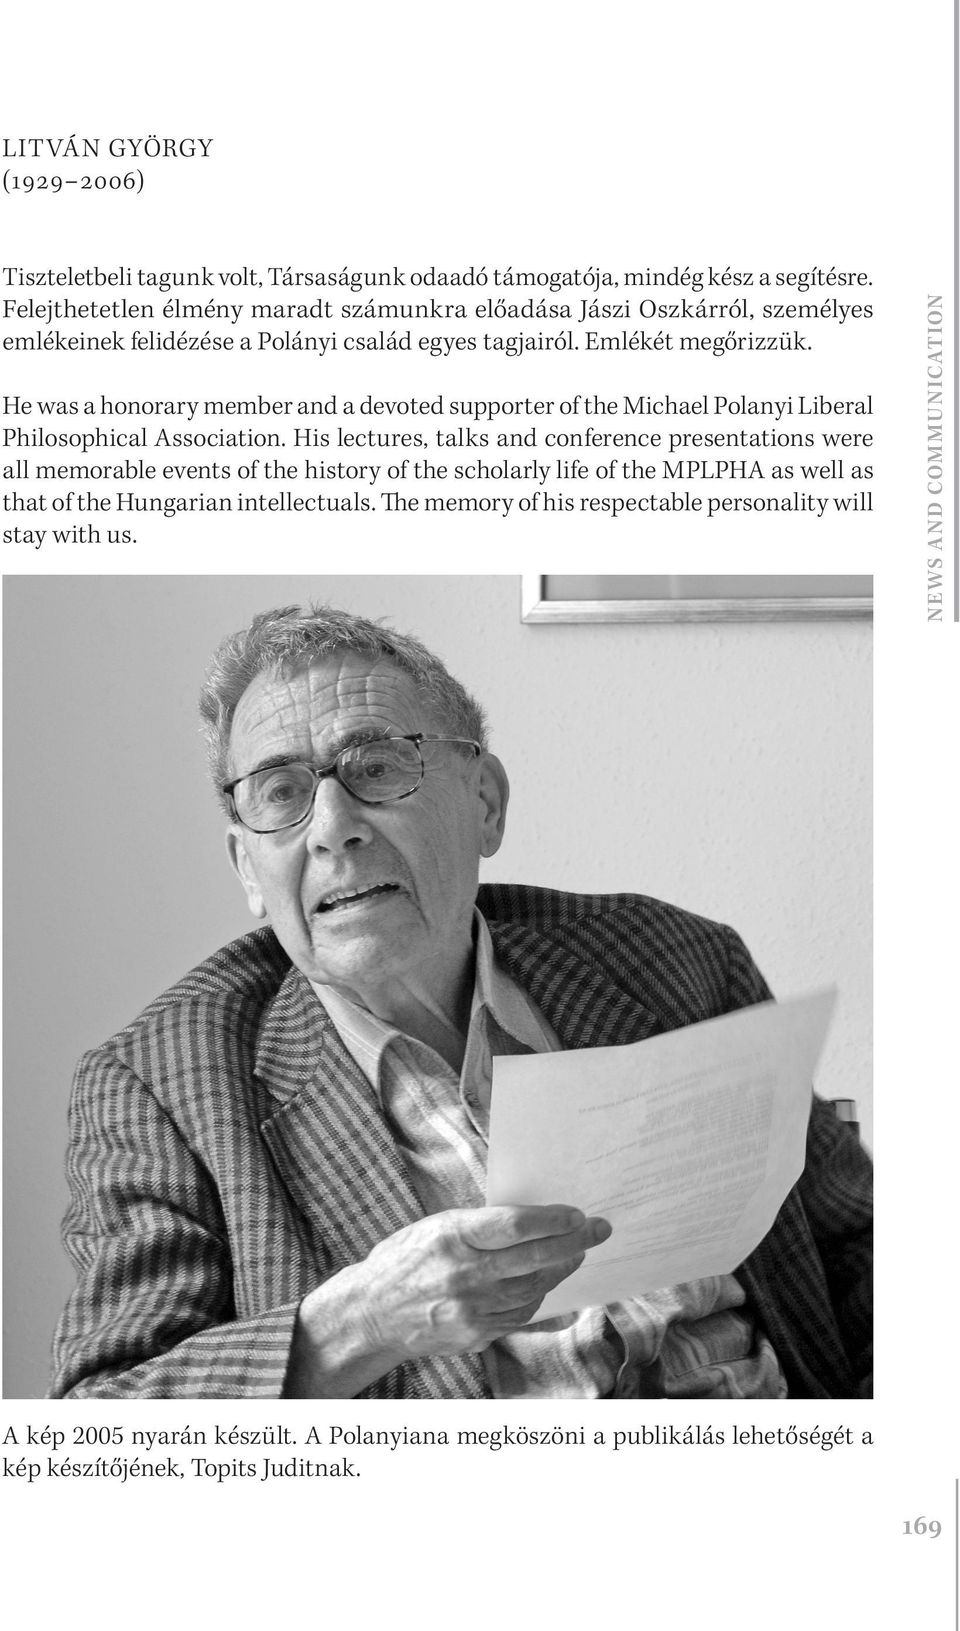 He was a honorary member and a devoted supporter of the Michael Polanyi Liberal Philosophical Association.